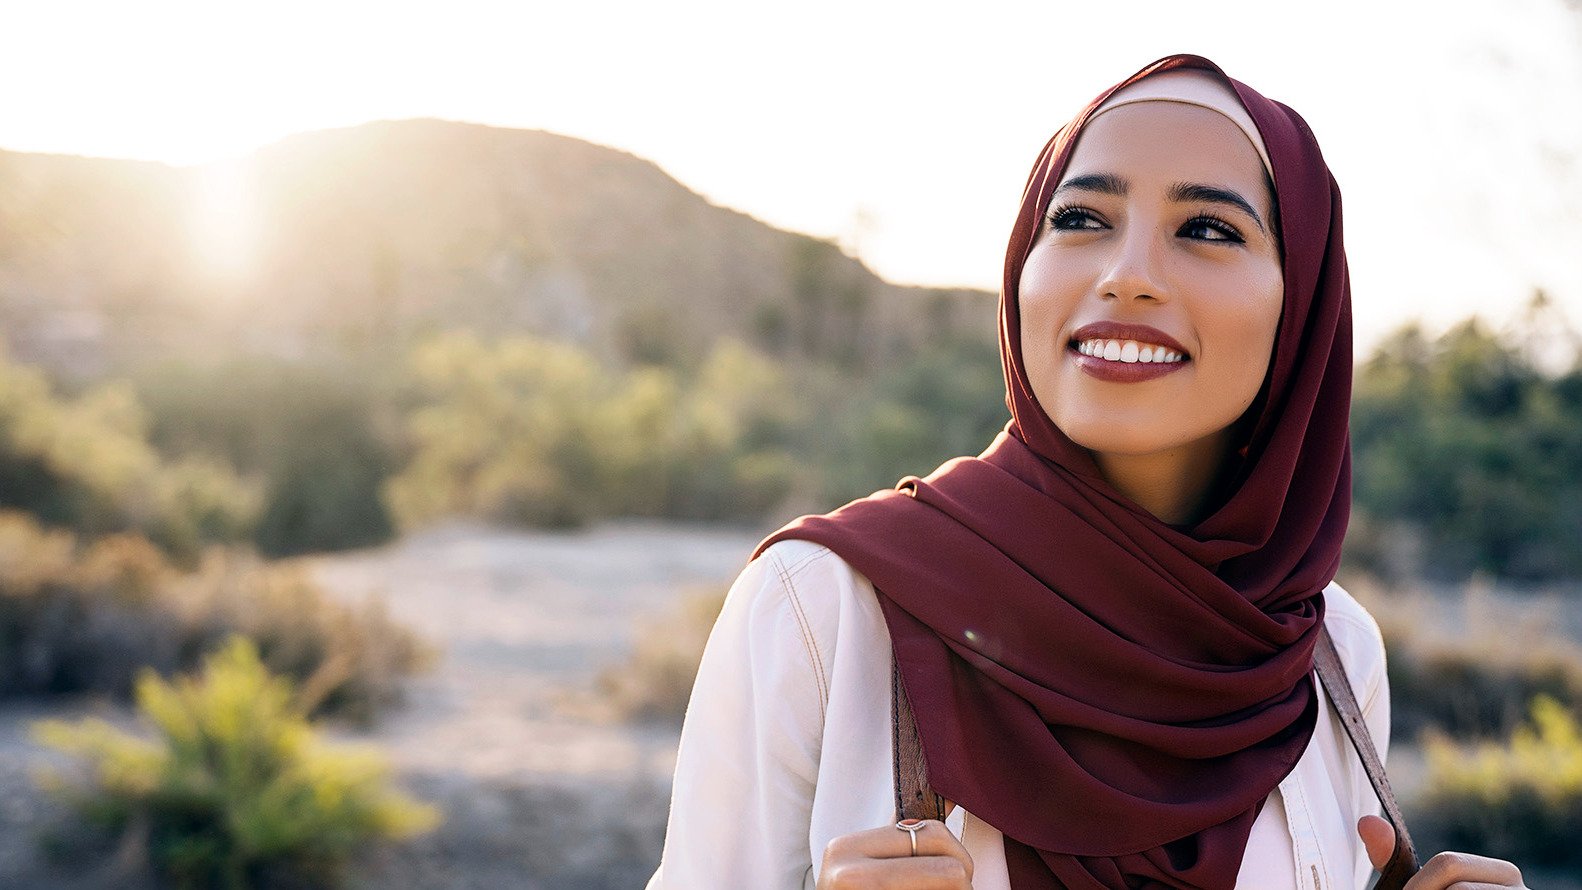 Muslim Dating – Match on culture and compatibility on eharmony